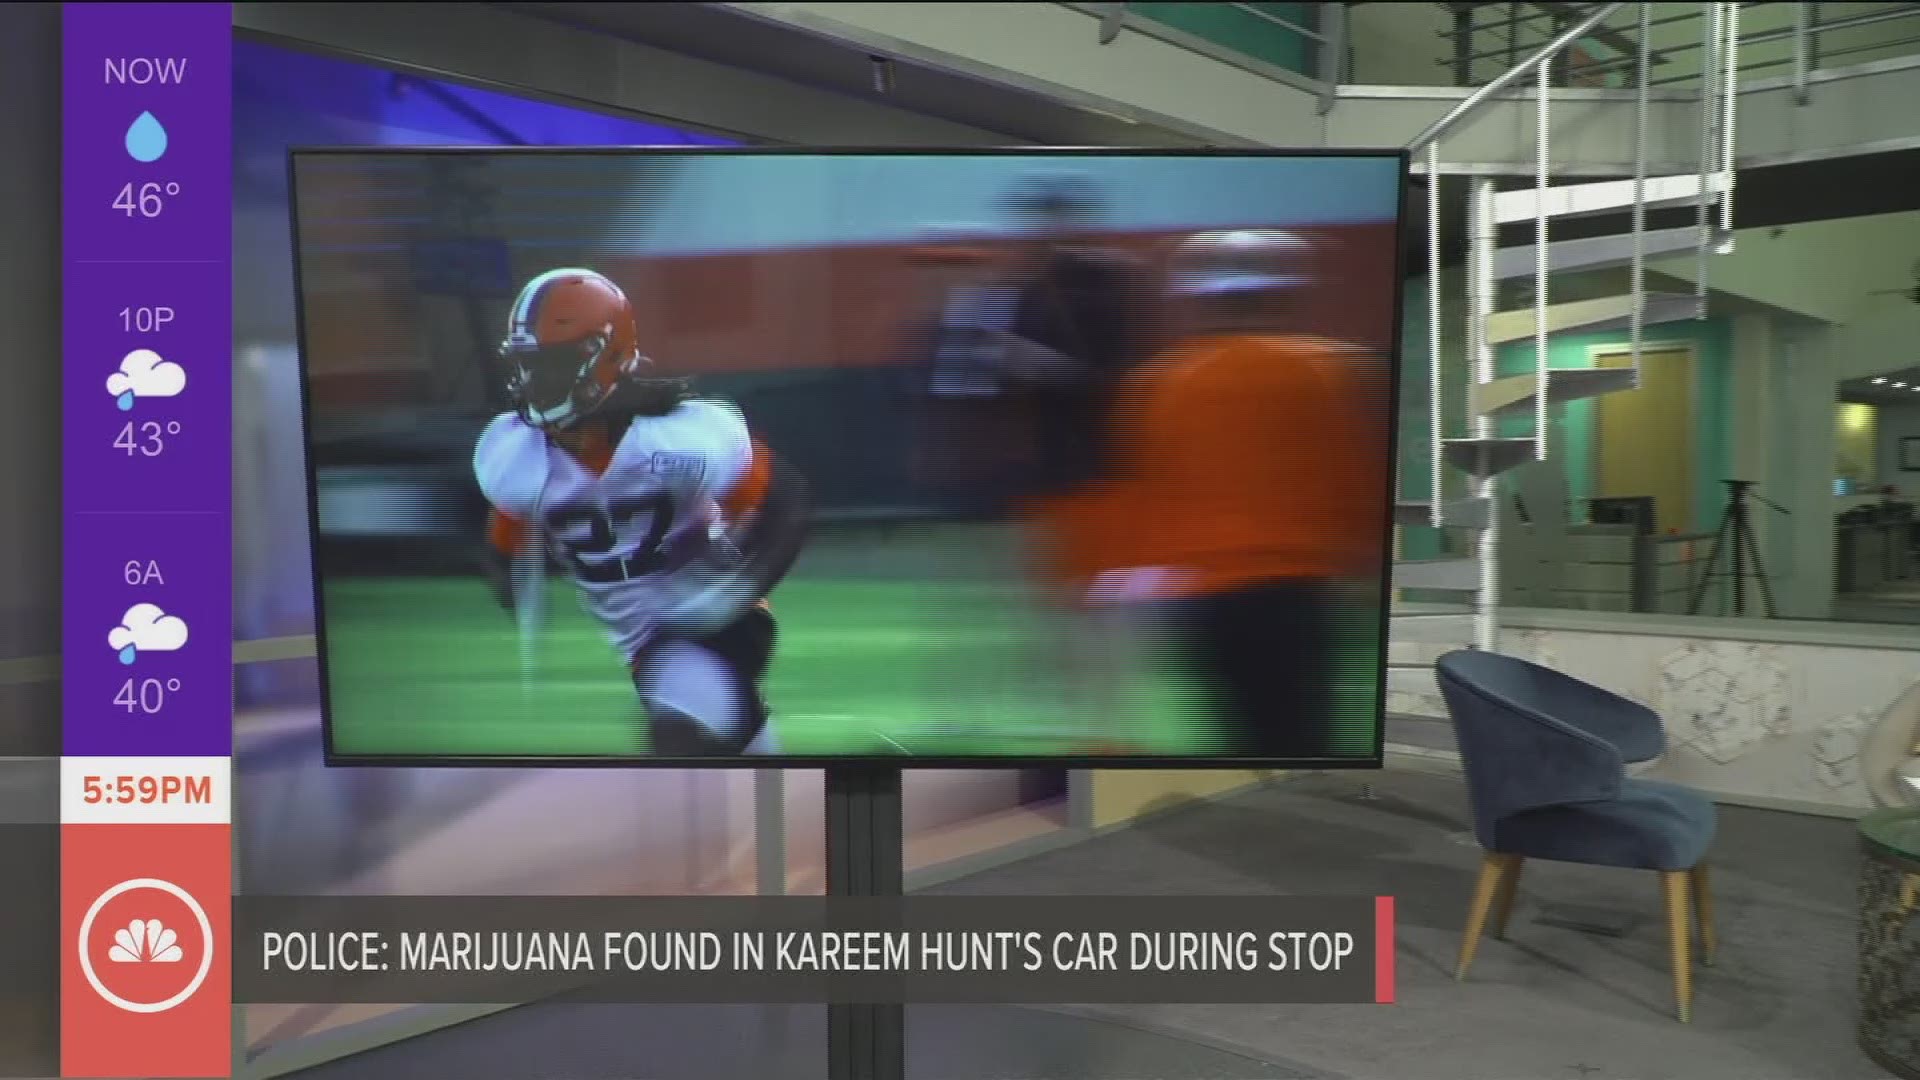 Rocky River Police found marijuana in the car of Cleveland Browns running Kareem Hunt on Tuesday night. The Browns are aware of the matter and looking into it.